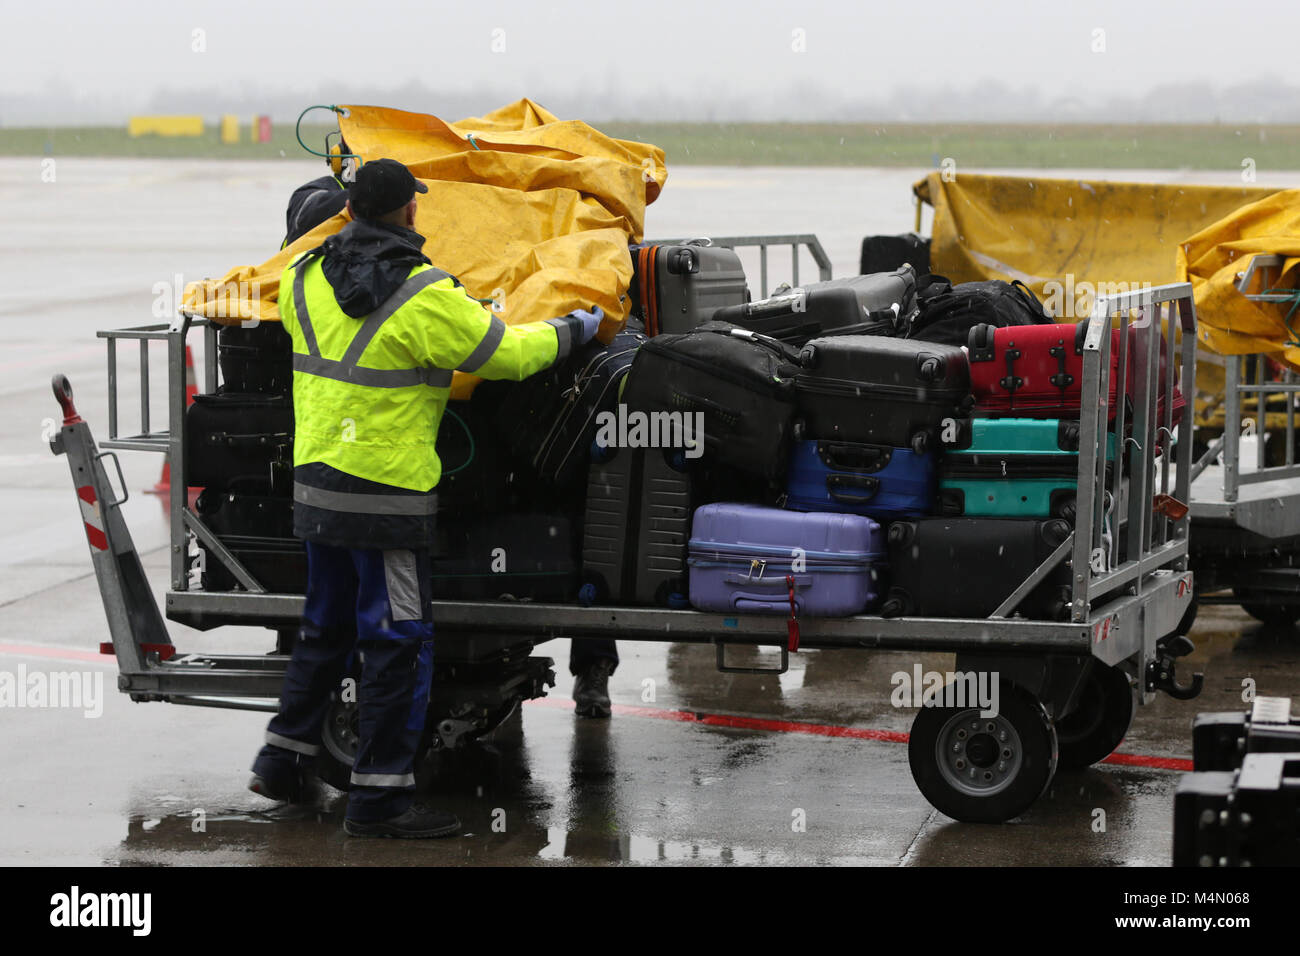 Airport workers cover passengers' luggage from the rain on a cart near the airplane. Stock Photo